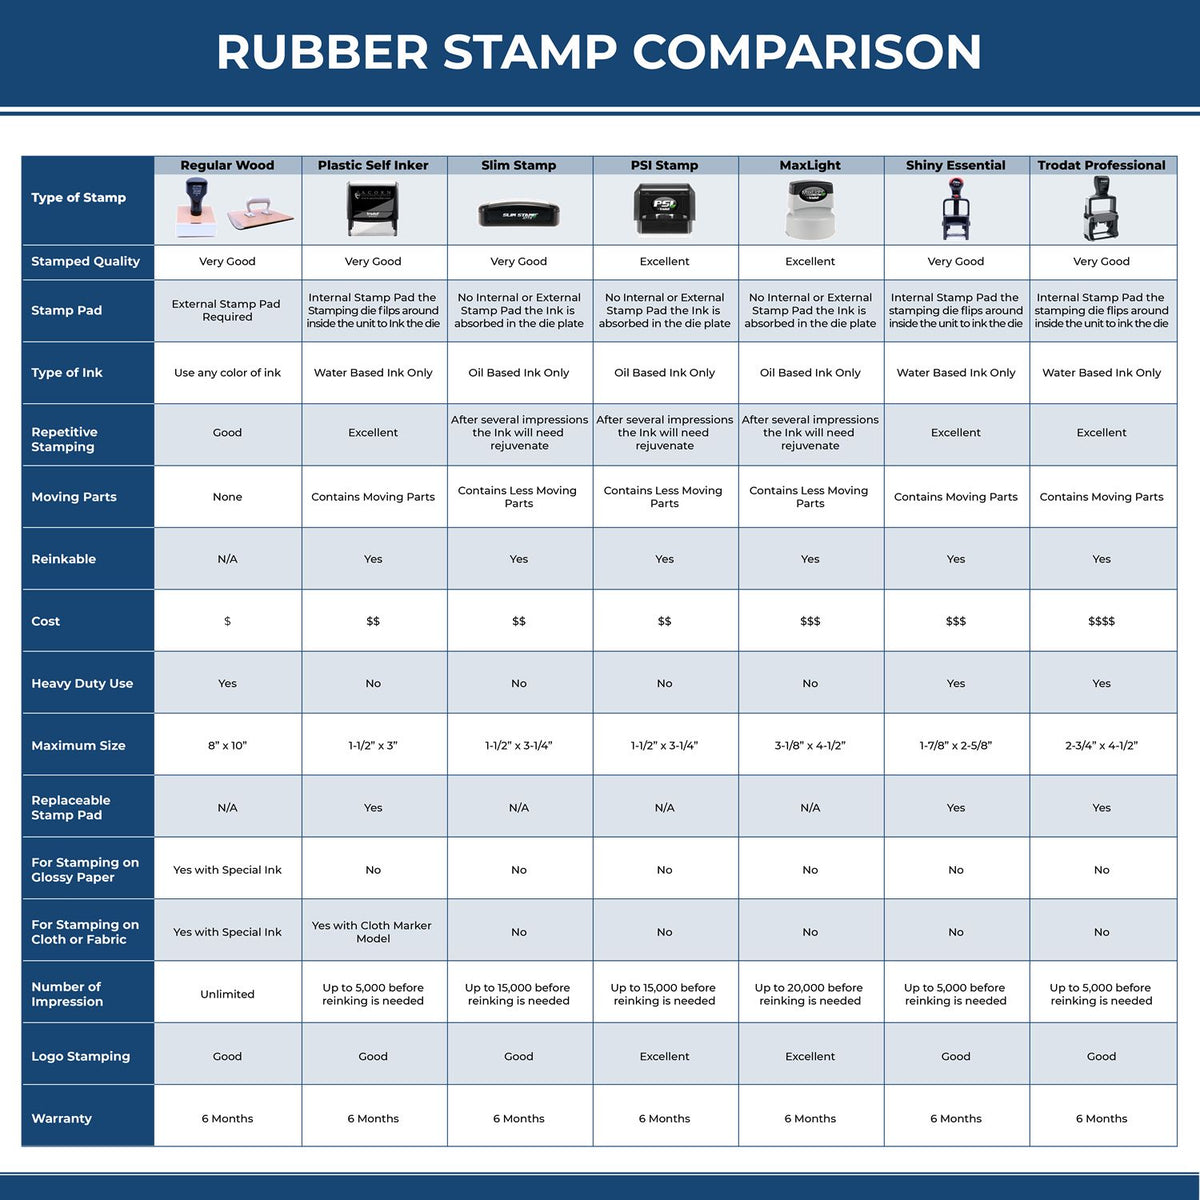 A comparison chart for the different types of mount models available for the Premium MaxLight Pre-Inked New Jersey Engineering Stamp.